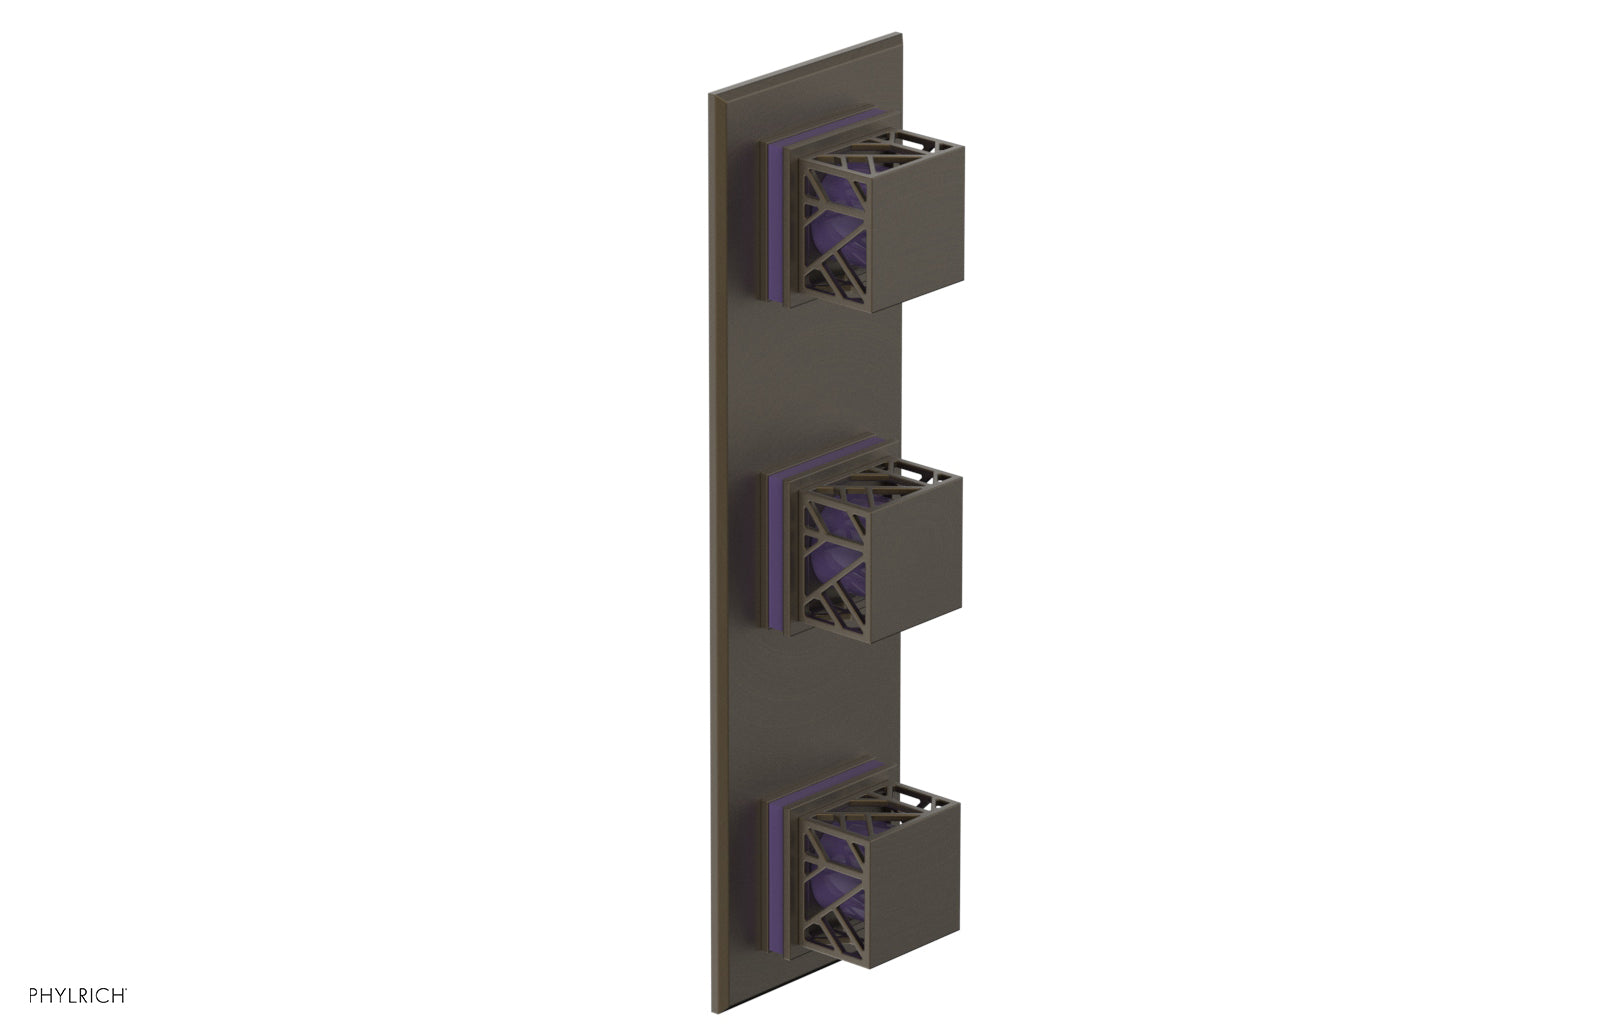 Phylrich JOLIE Thermostatic Valve with Two Volume Control with "Purple" Accents